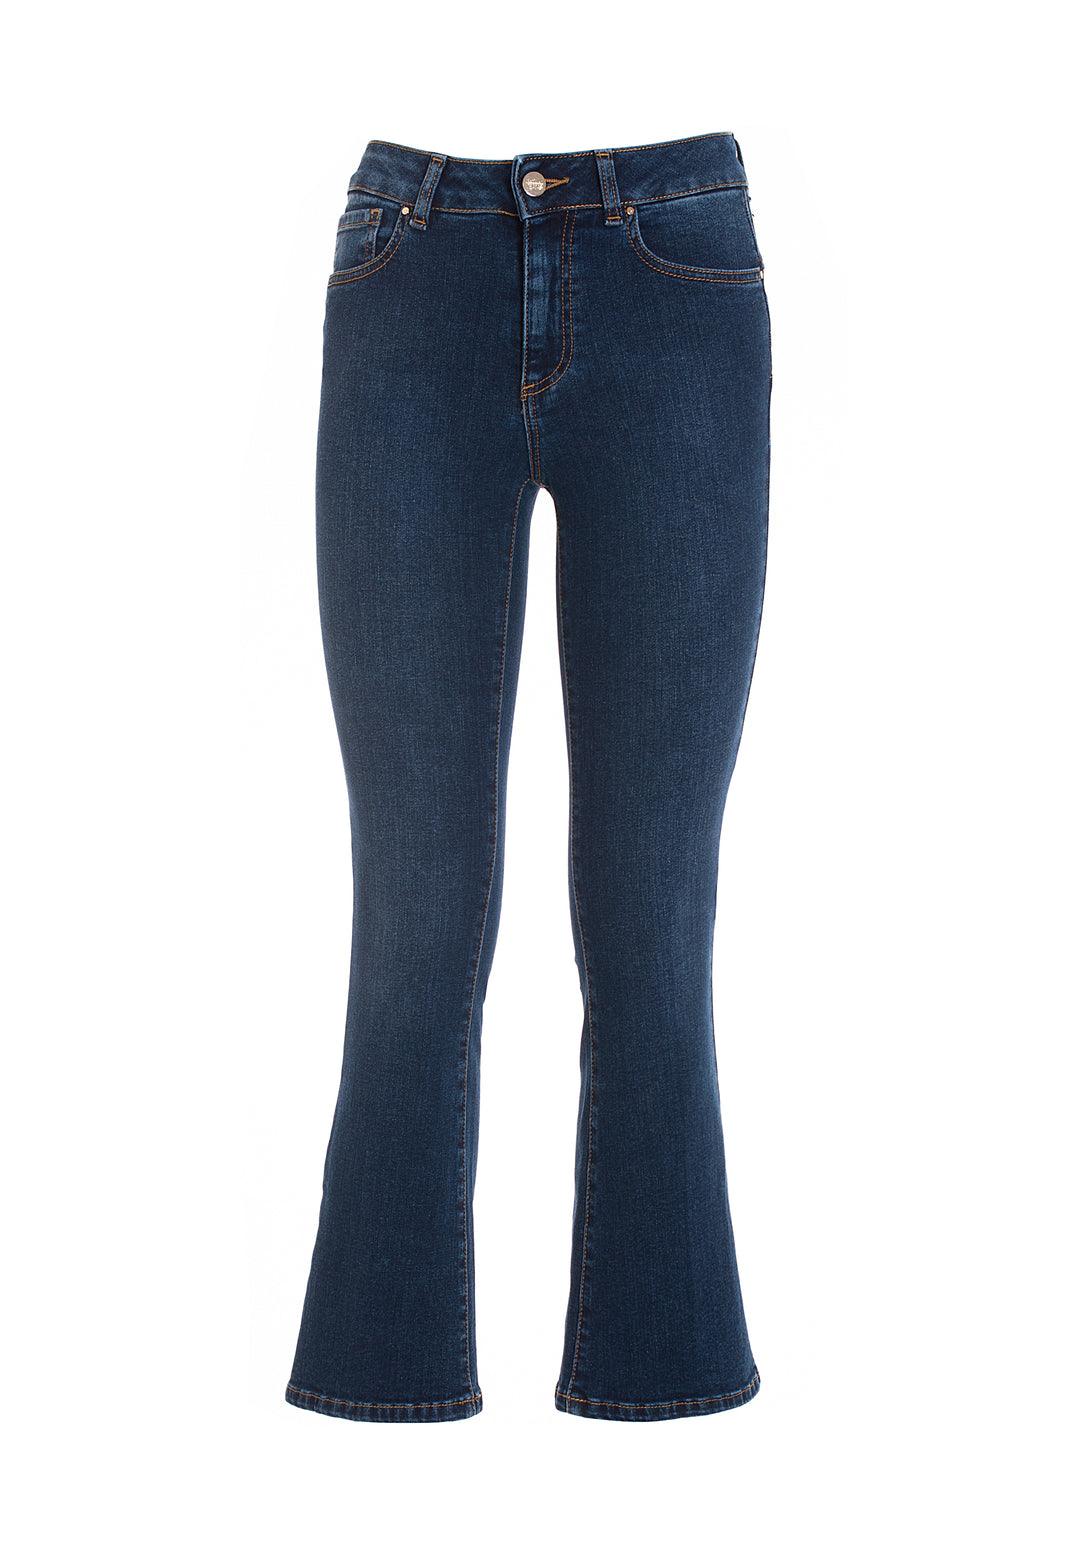 Jeans Bella flare cropped made with a sophisticated stretch denim